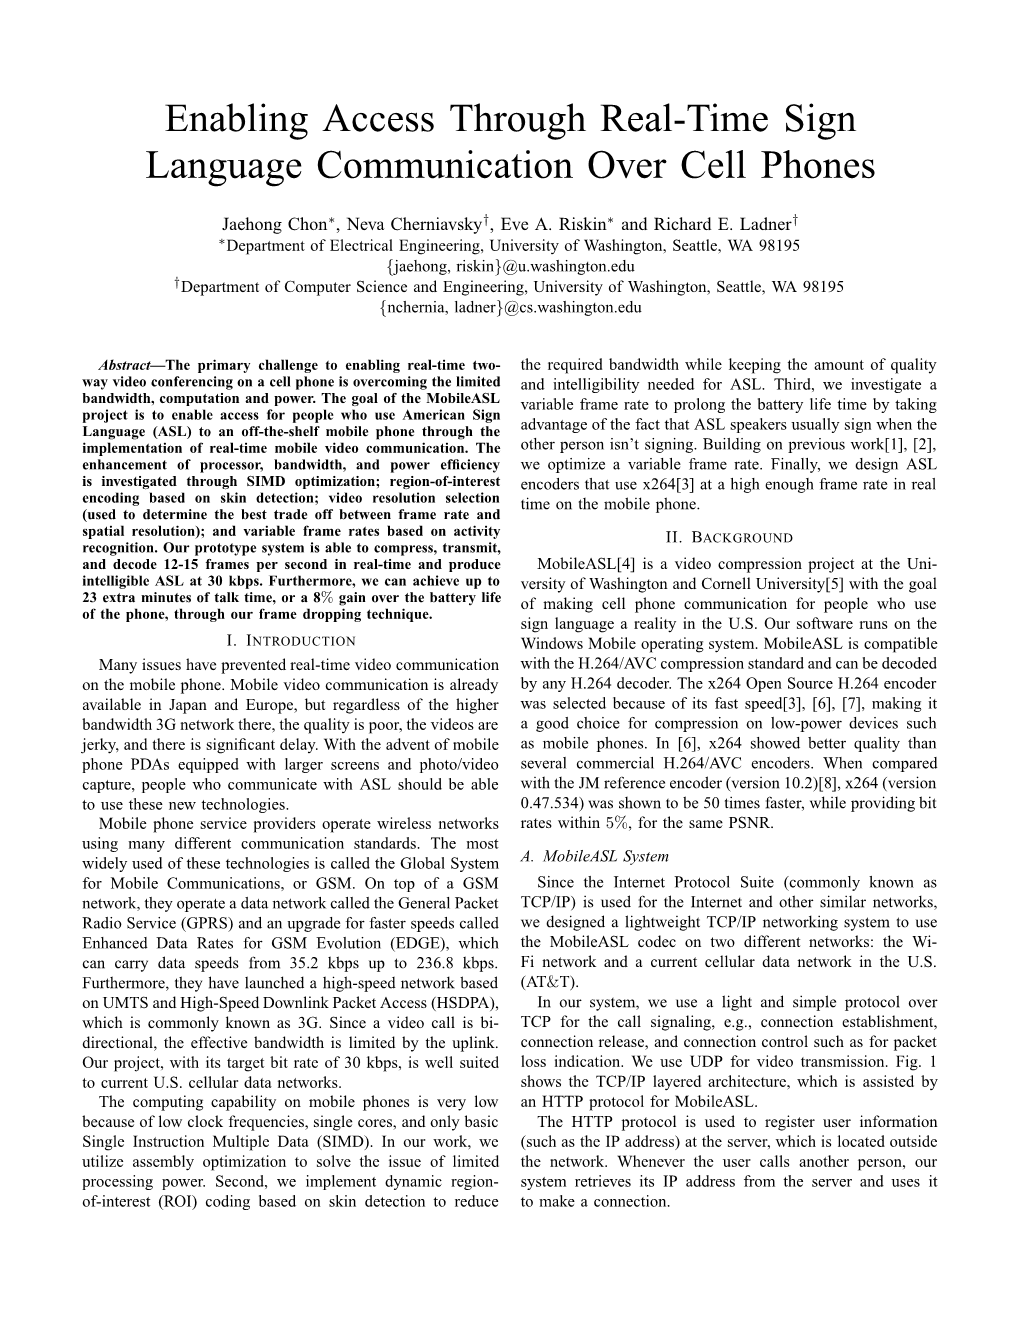 Enabling Access Through Real-Time Sign Language Communication Over Cell Phones